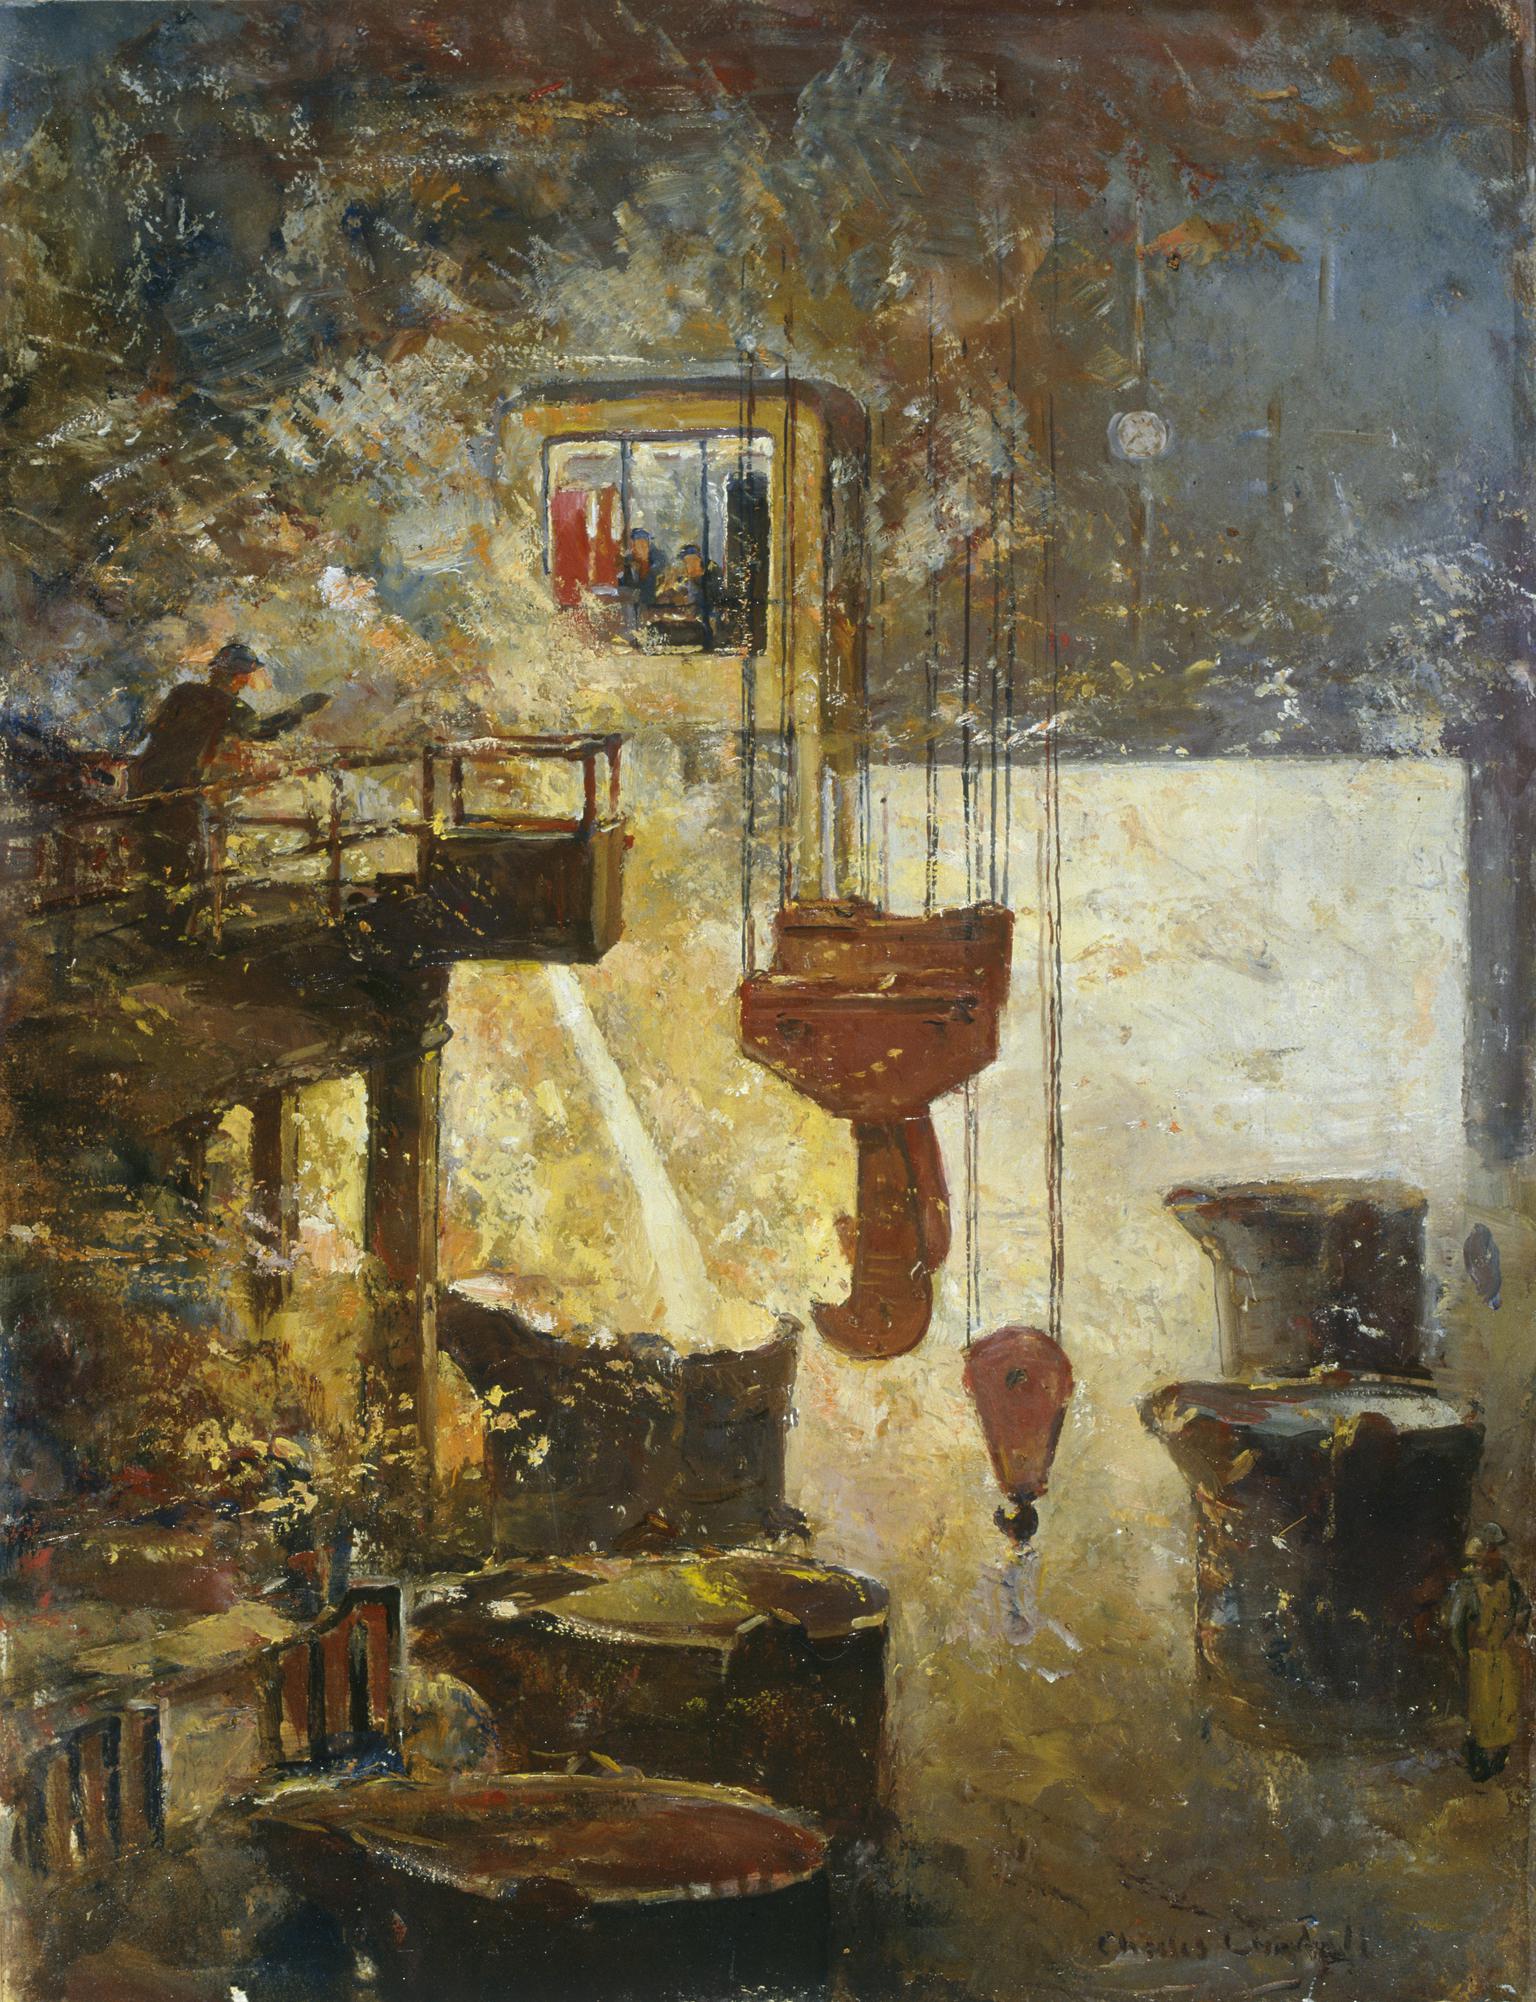 Furnace/smelting at a steelworks, painting